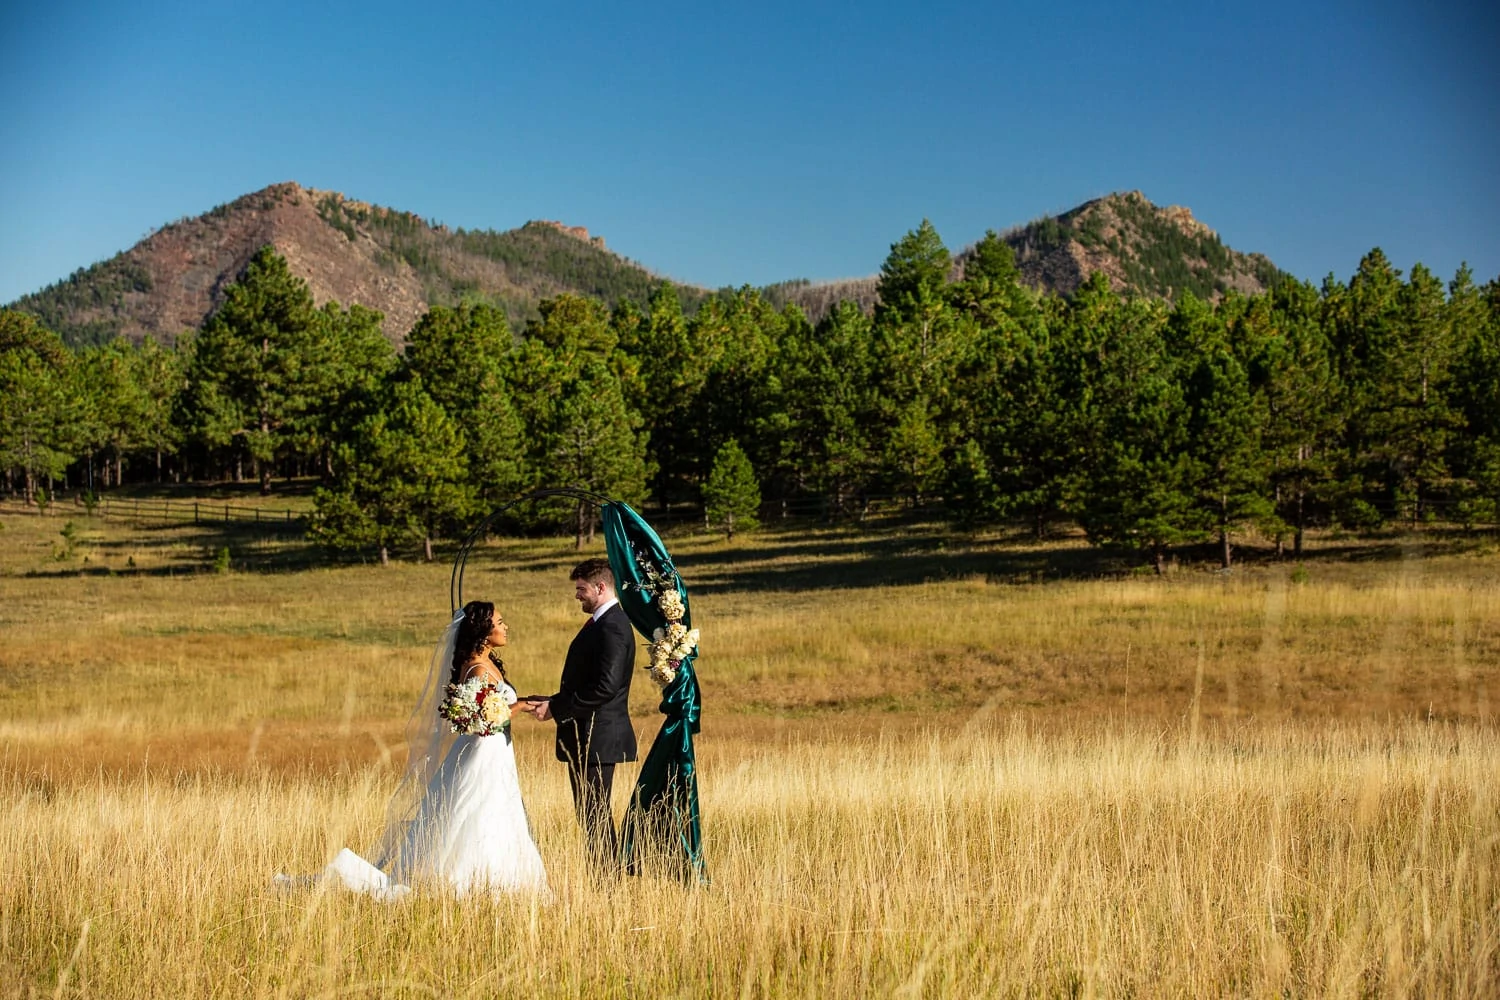 An interracial couple says their private vows in front of the mountains in Boulder, Colorado.